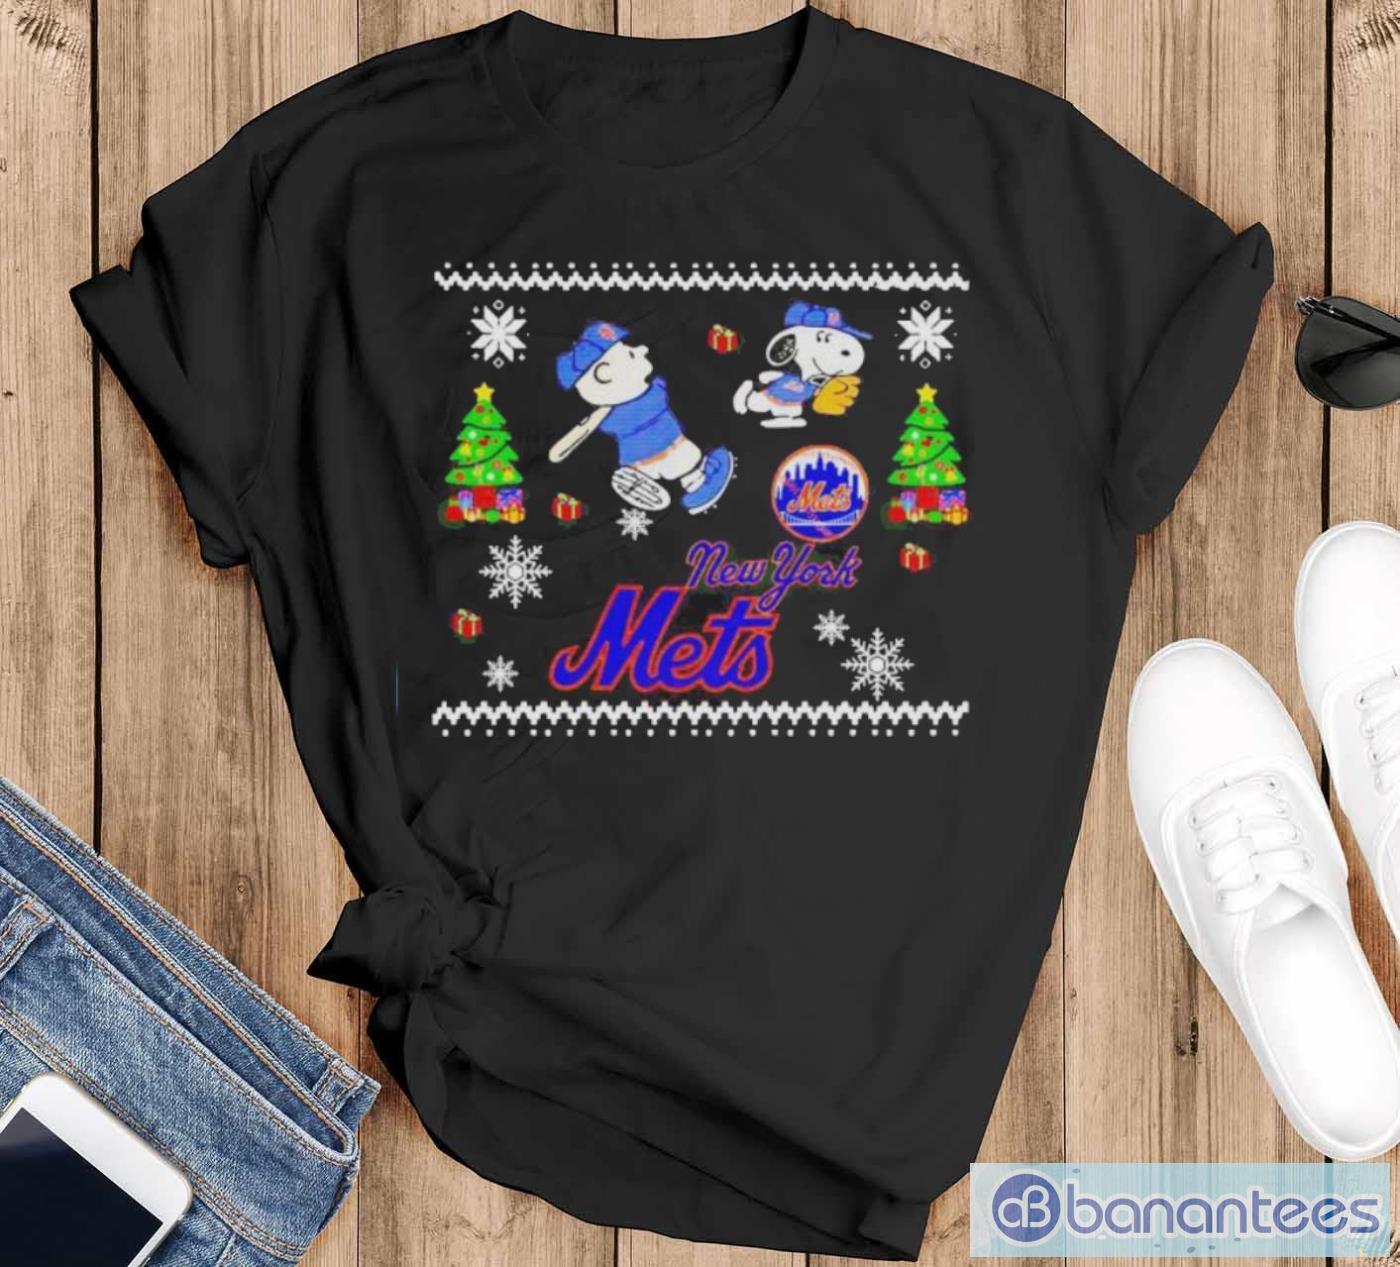 Official New York Mets Snoopy For Christmas Shirt - Banantees